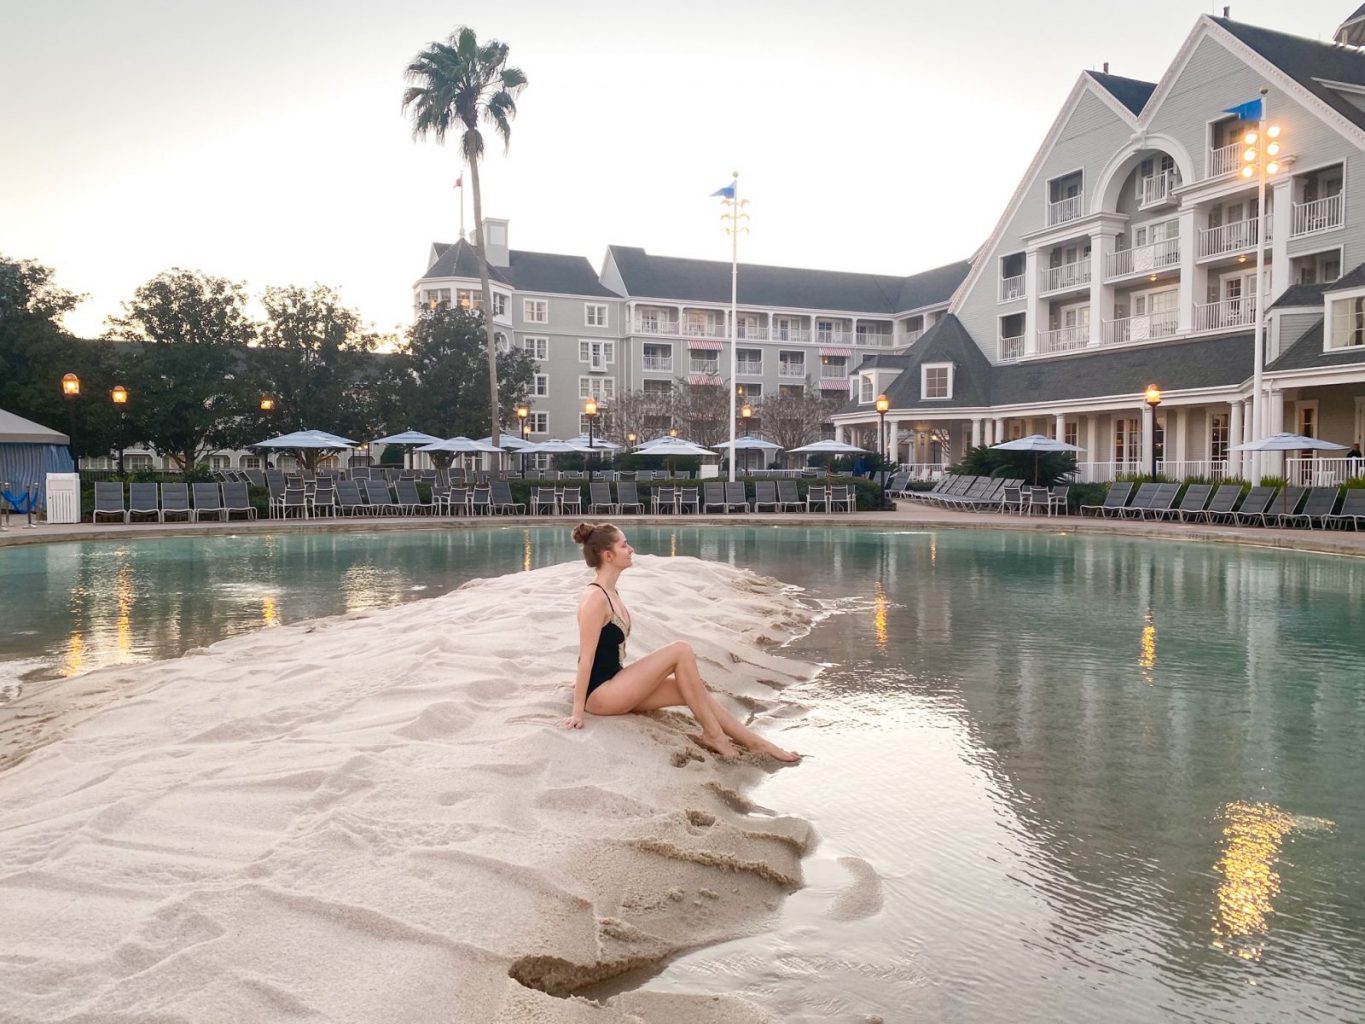 woman sitting on sand in front of water and large blue hotel building best Disney World resorts
